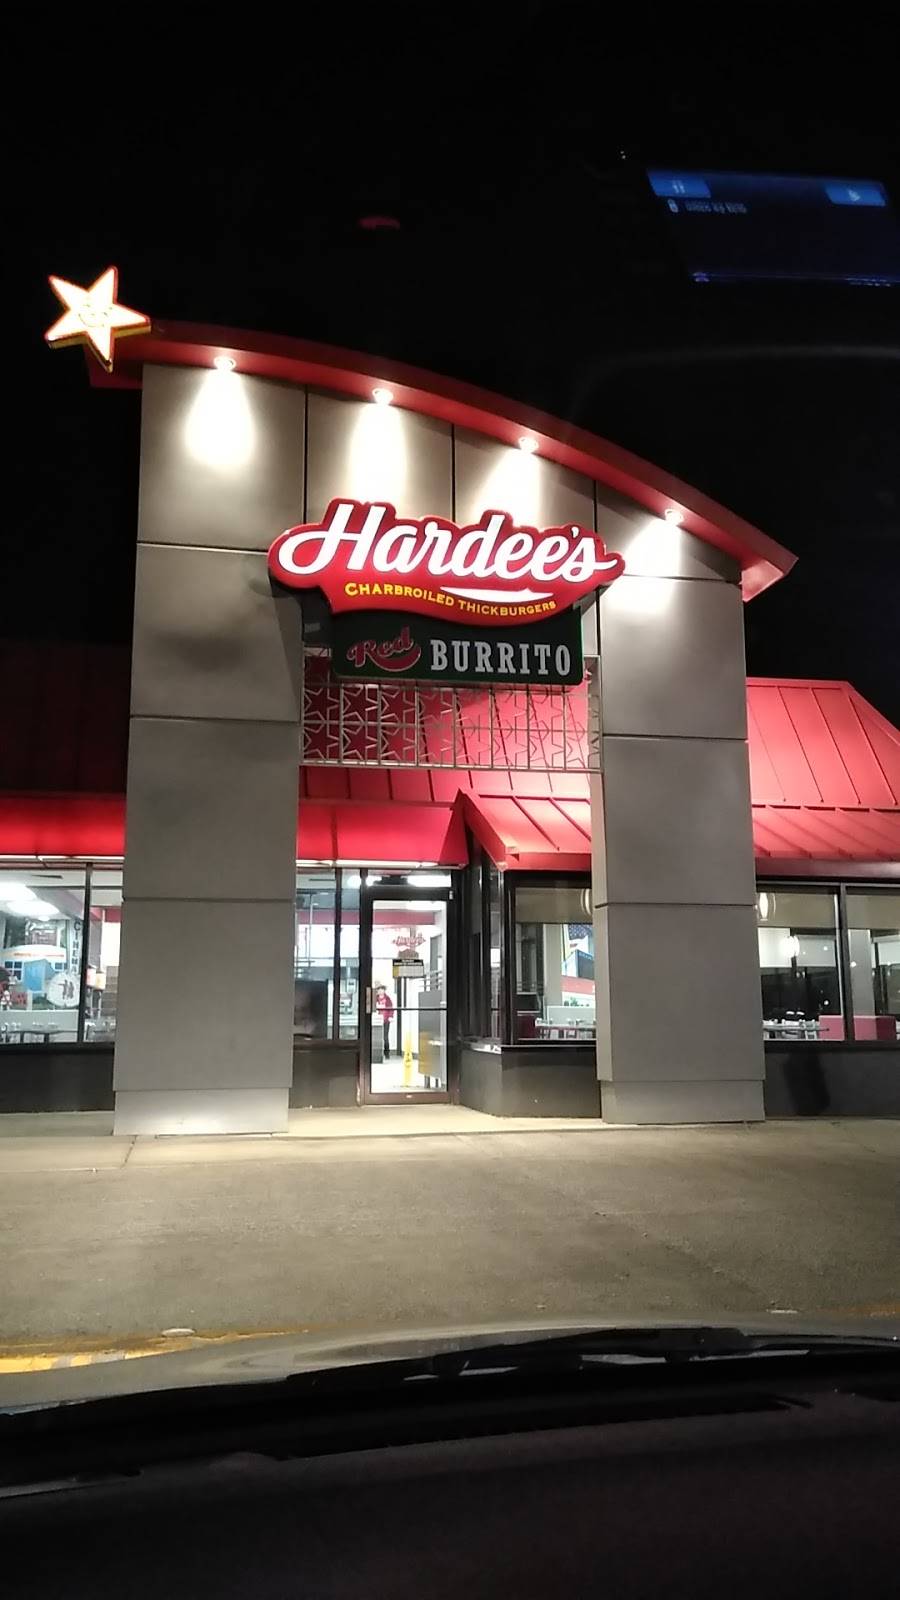 Hardees | restaurant | 3249 W Chain of Rocks Rd, Granite City, IL 62040, USA | 6189317748 OR +1 618-931-7748